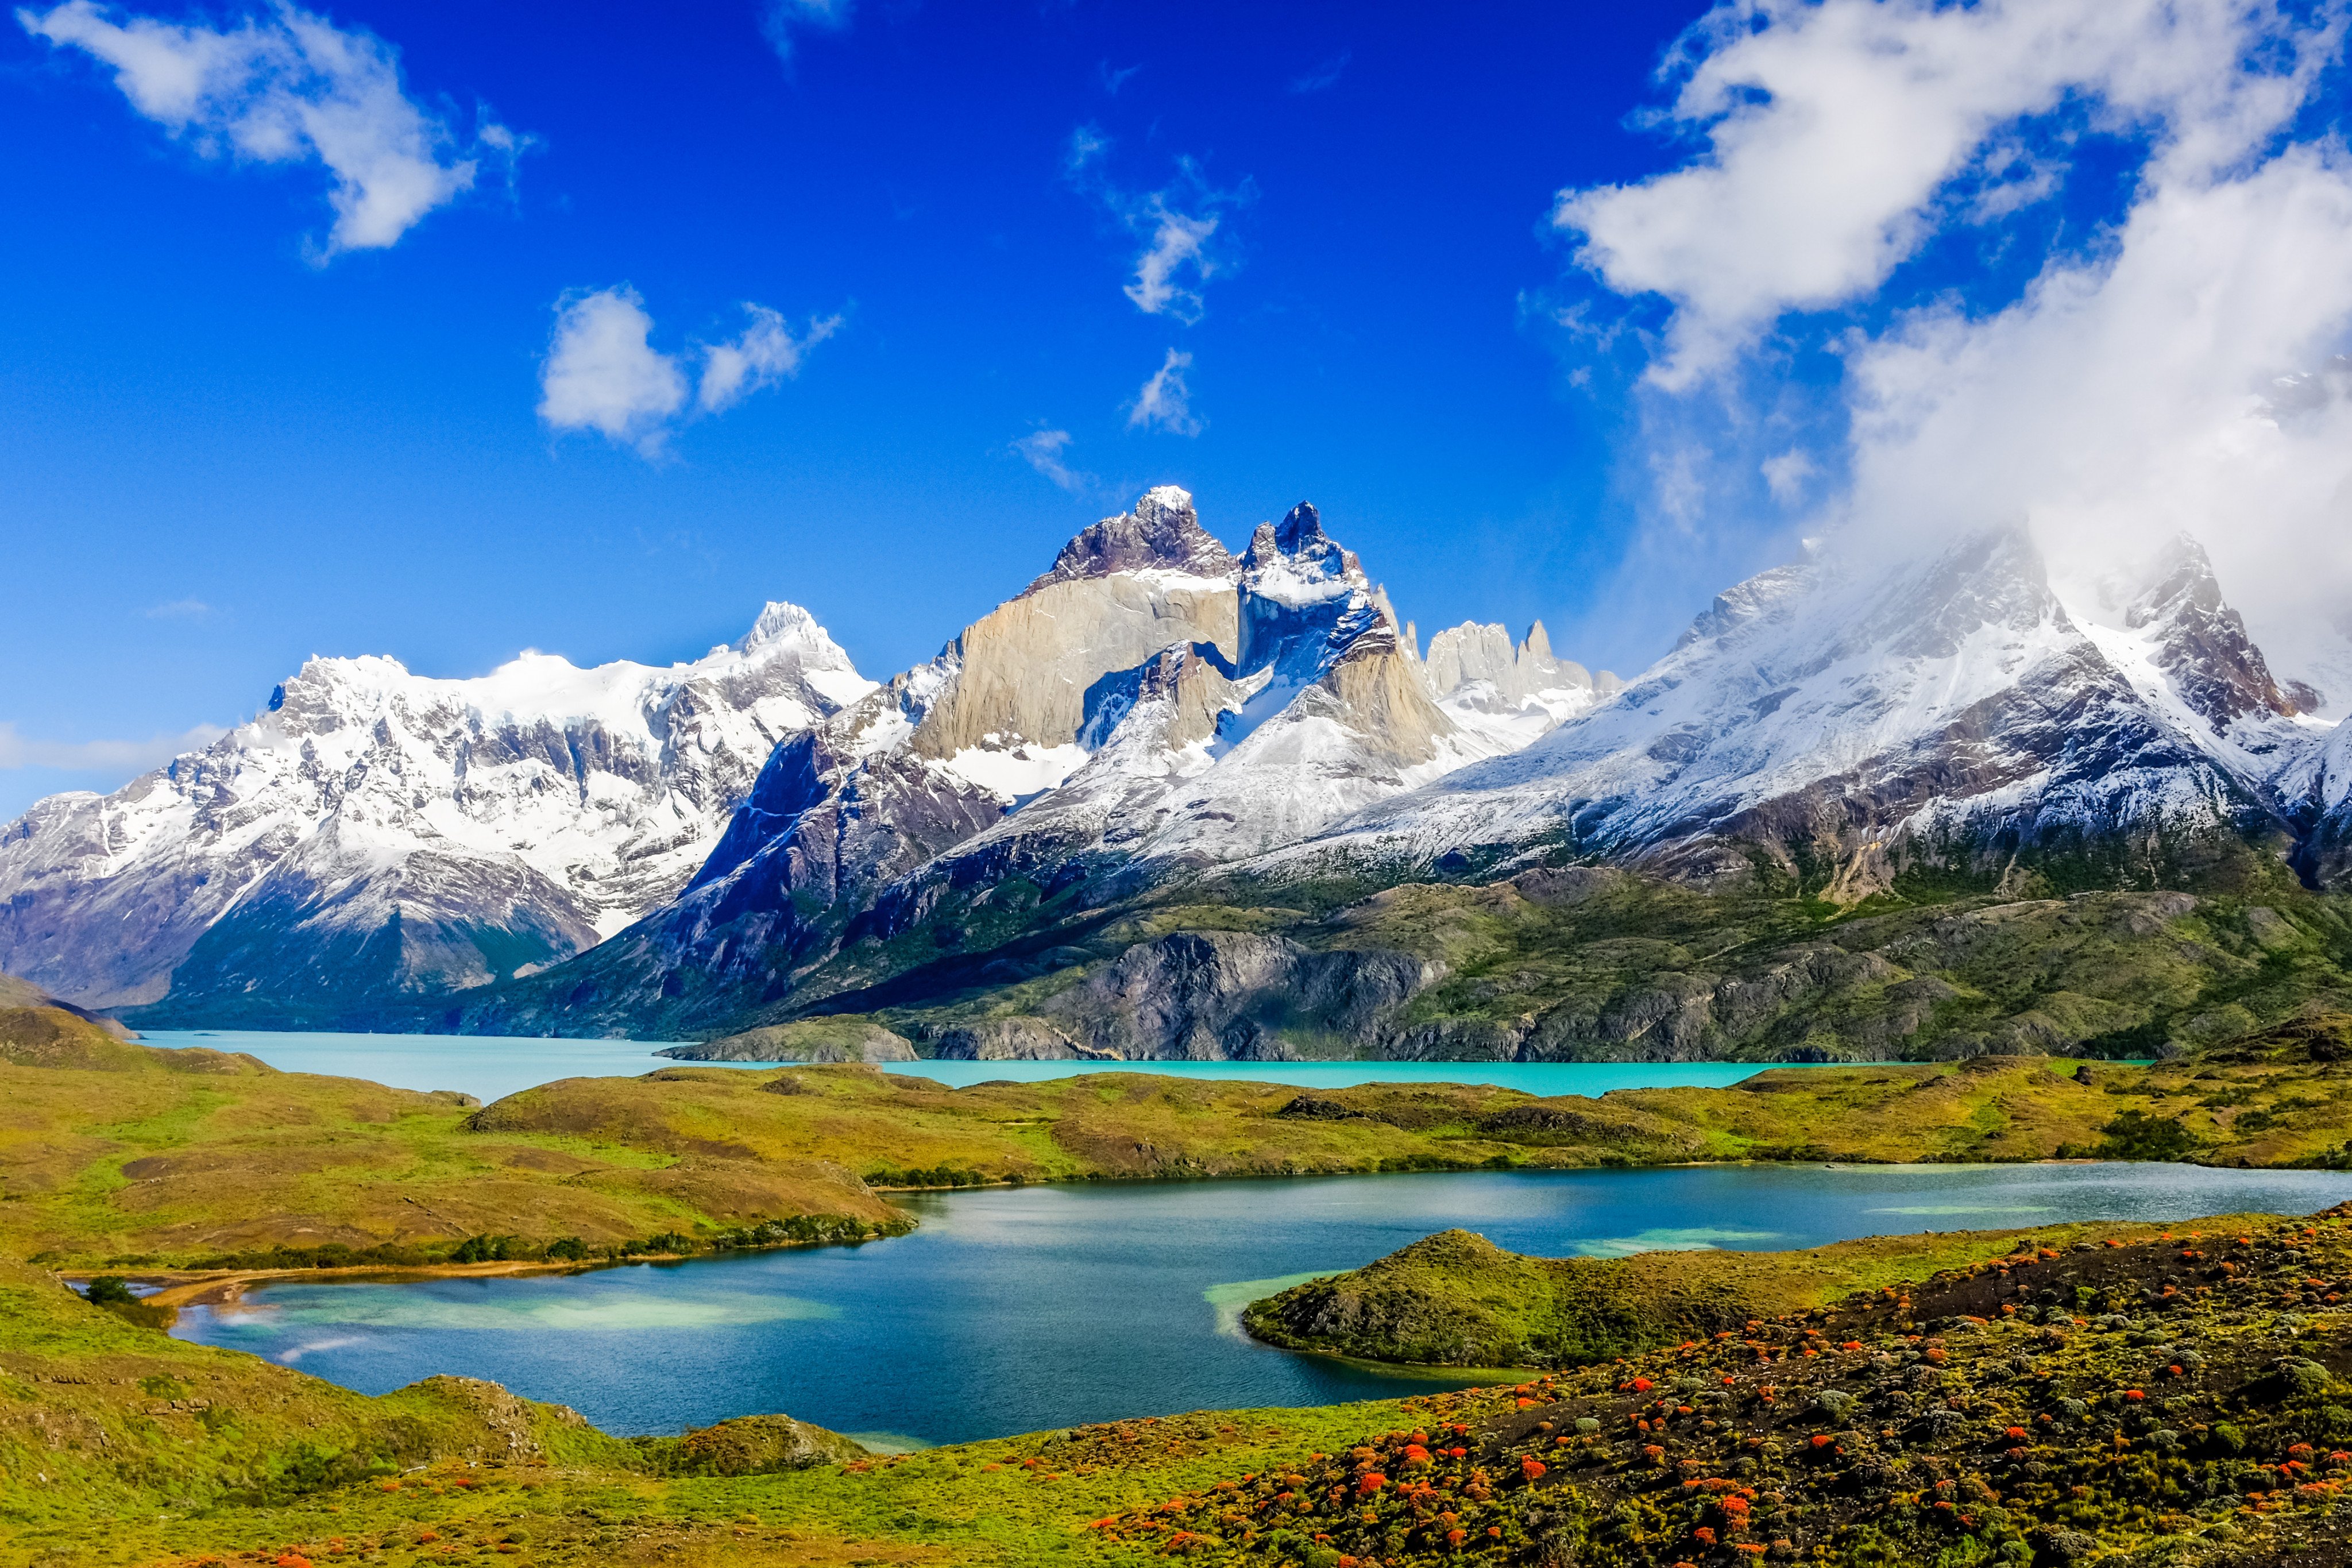 Th beautiful Patagonia landscape showing the Andes mountain range, winding road and lake at Torres del Paine National Park, Chile. Photo: Shutterstock